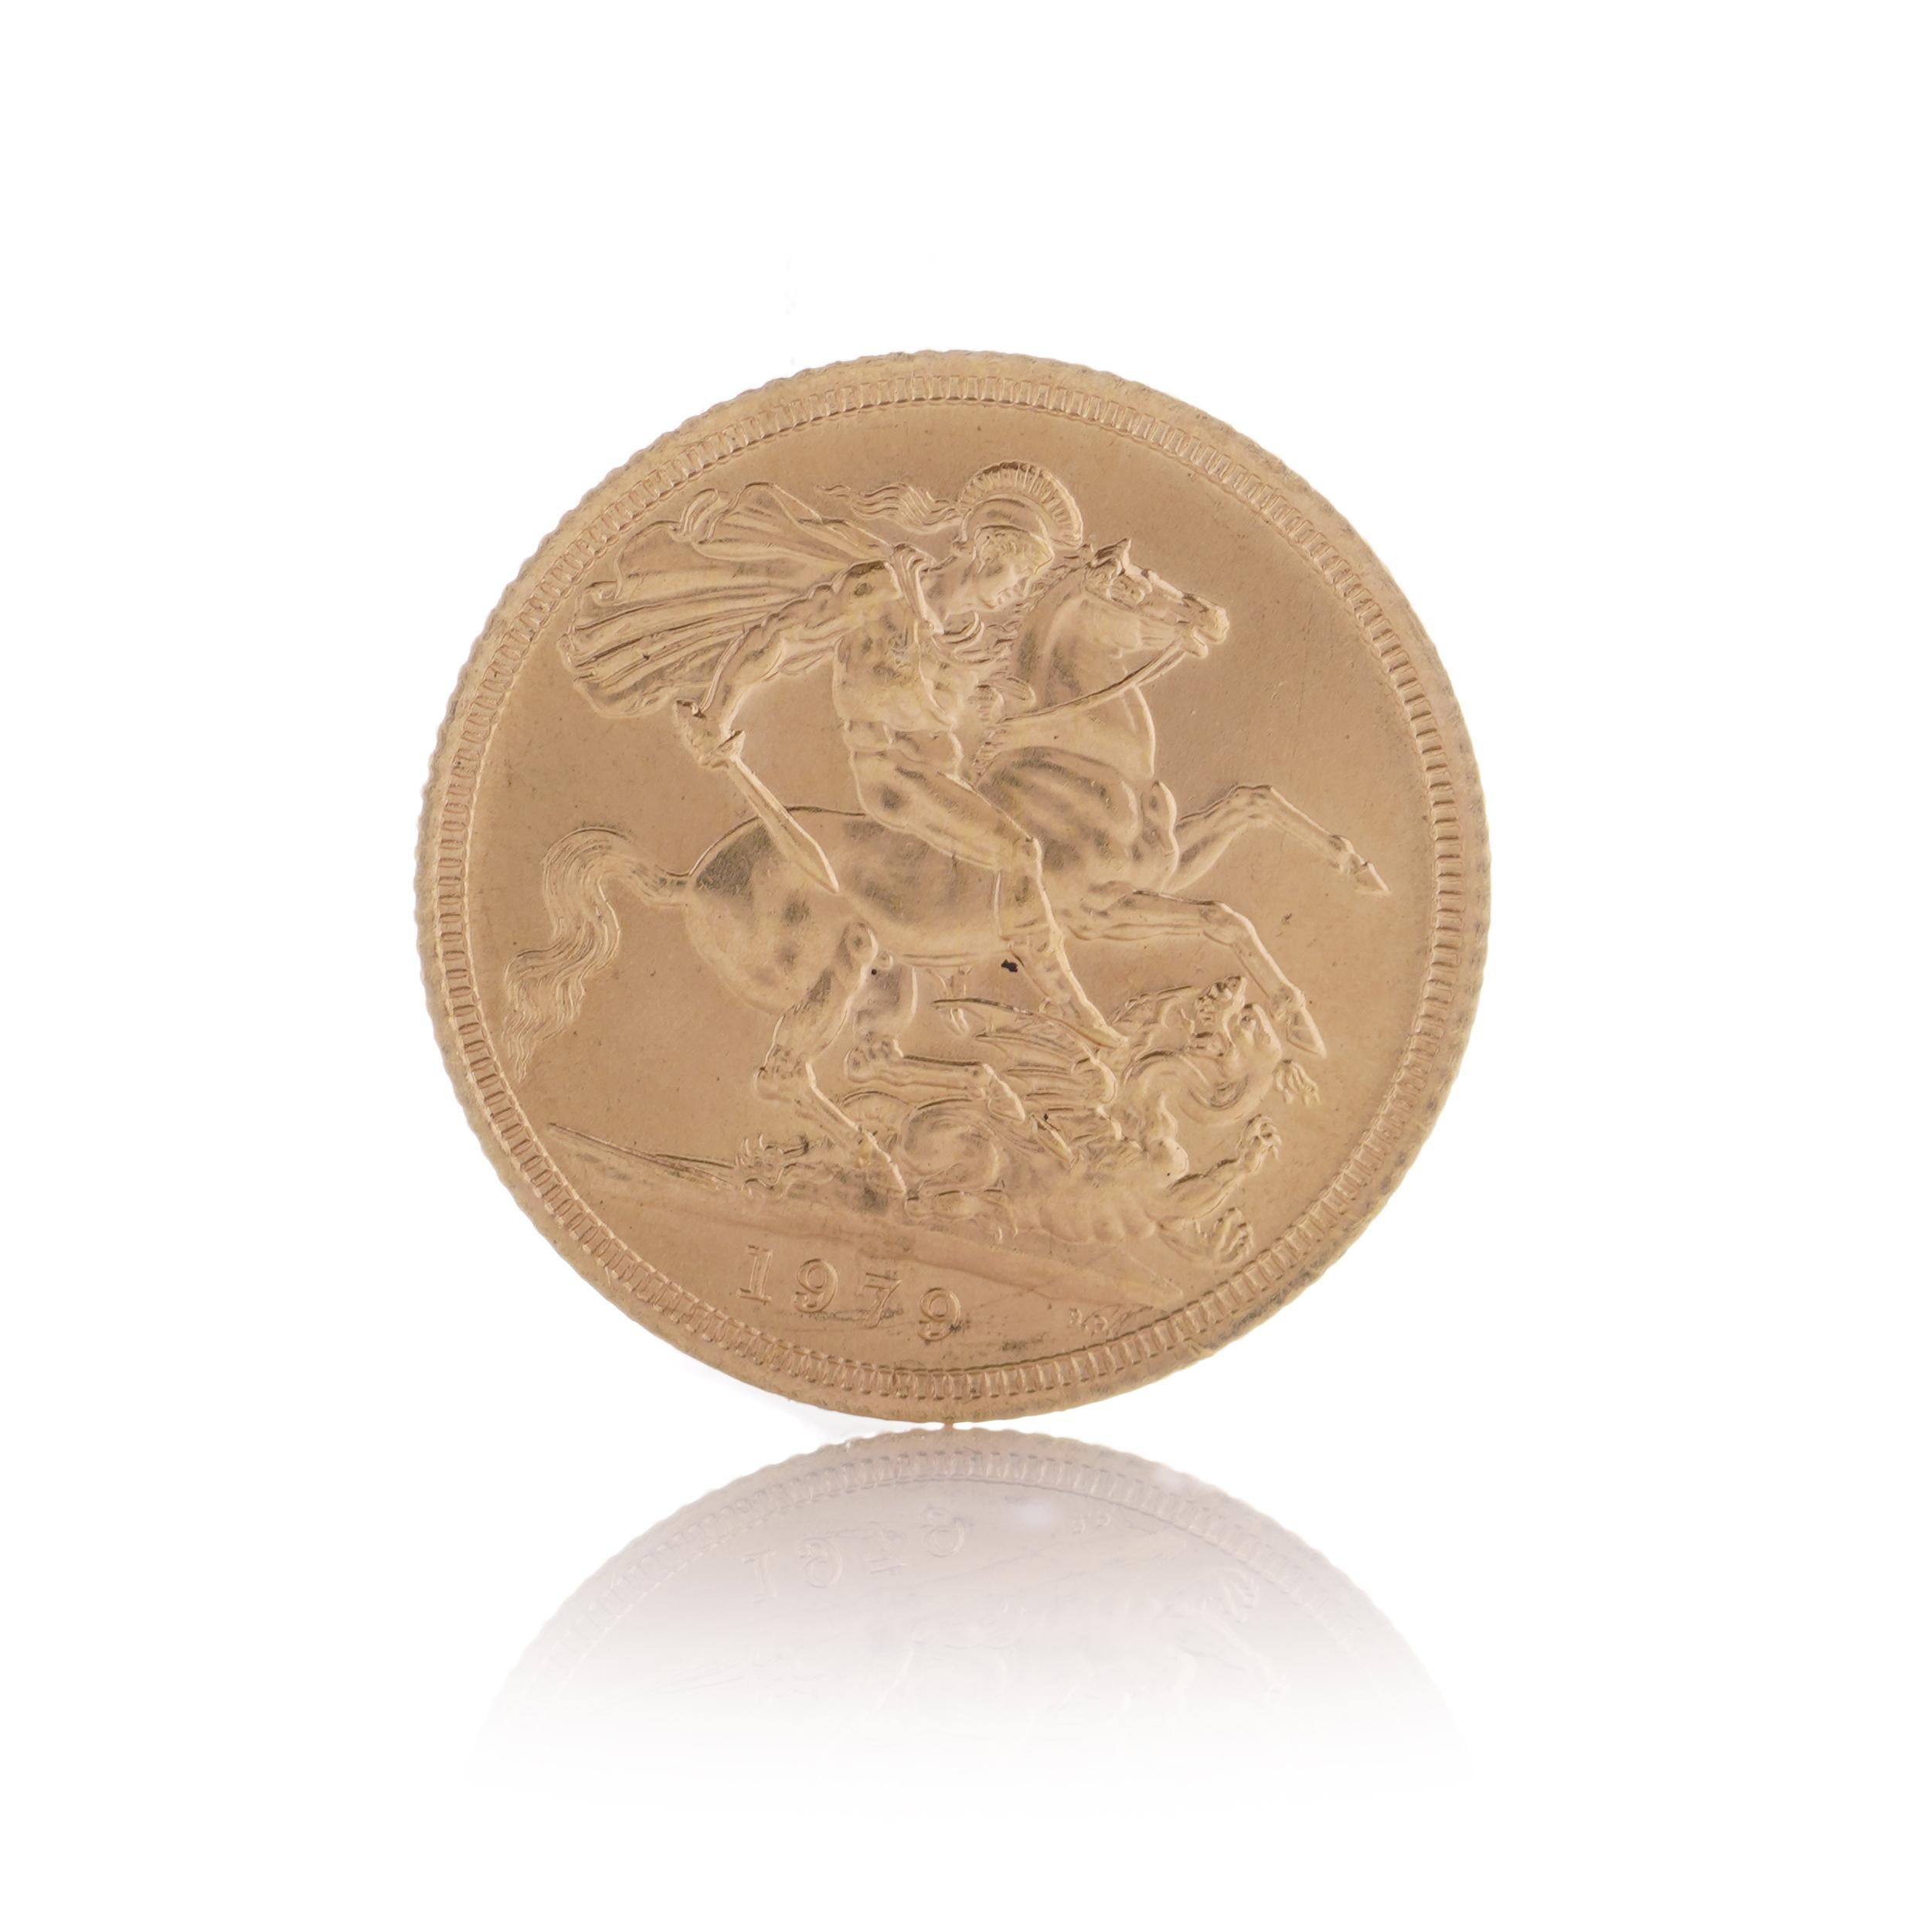 A 1979 gold Sovereign featuring Queen Elizabeth II and the George & Dragon design in extremely fine condition. Coin struck by the Royal Mint and provided in a plastic capsule.

Manufacturer: Royal Mint

Weight (grams): 7.98

Pure gold content